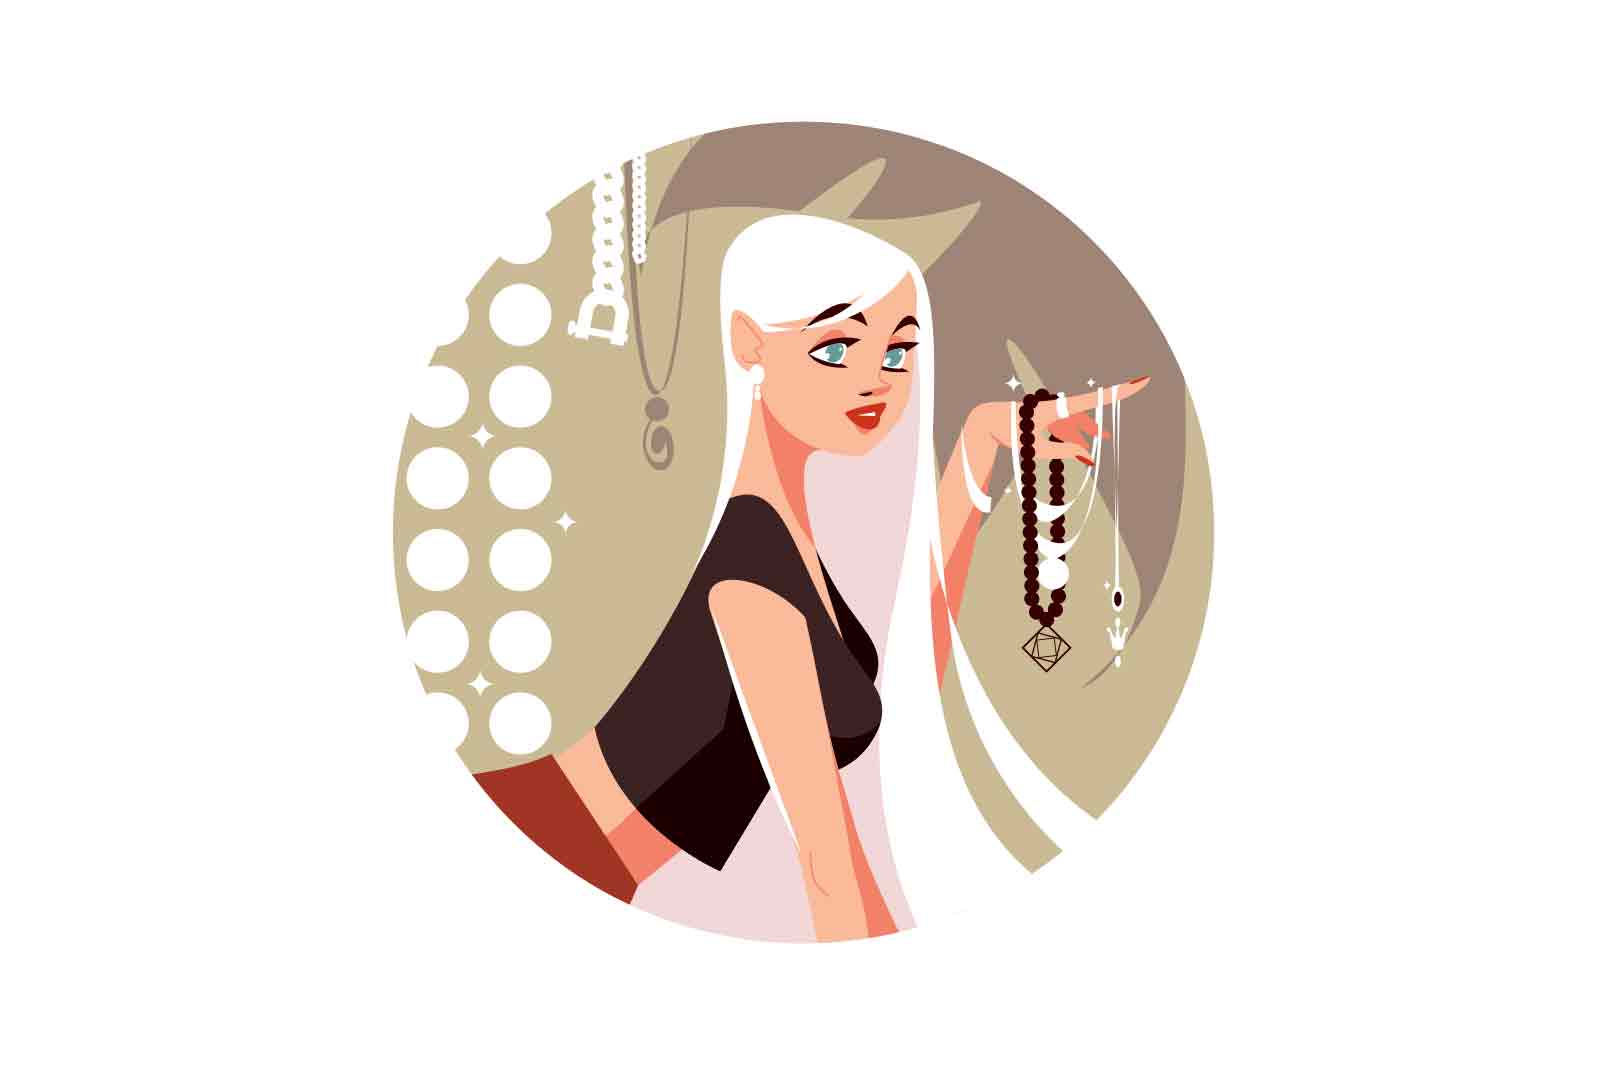 Fashionable blonde woman showing jewelry, promotional ad vector illustration. Cute girl with attractive appearance flat concept